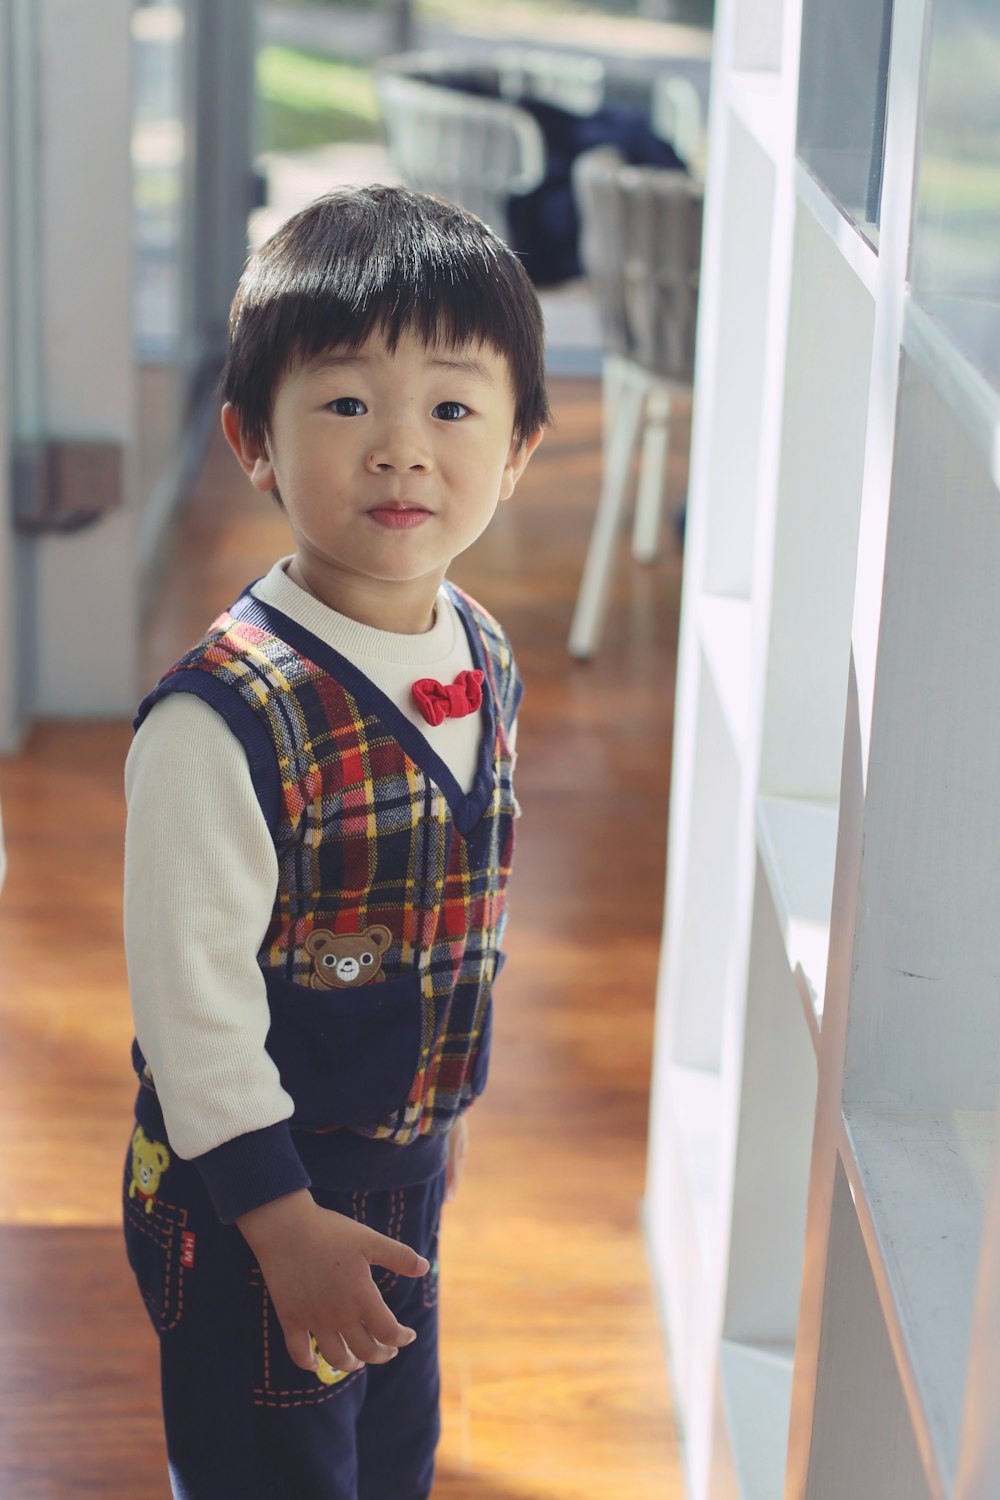 a little boy that is standing in a room